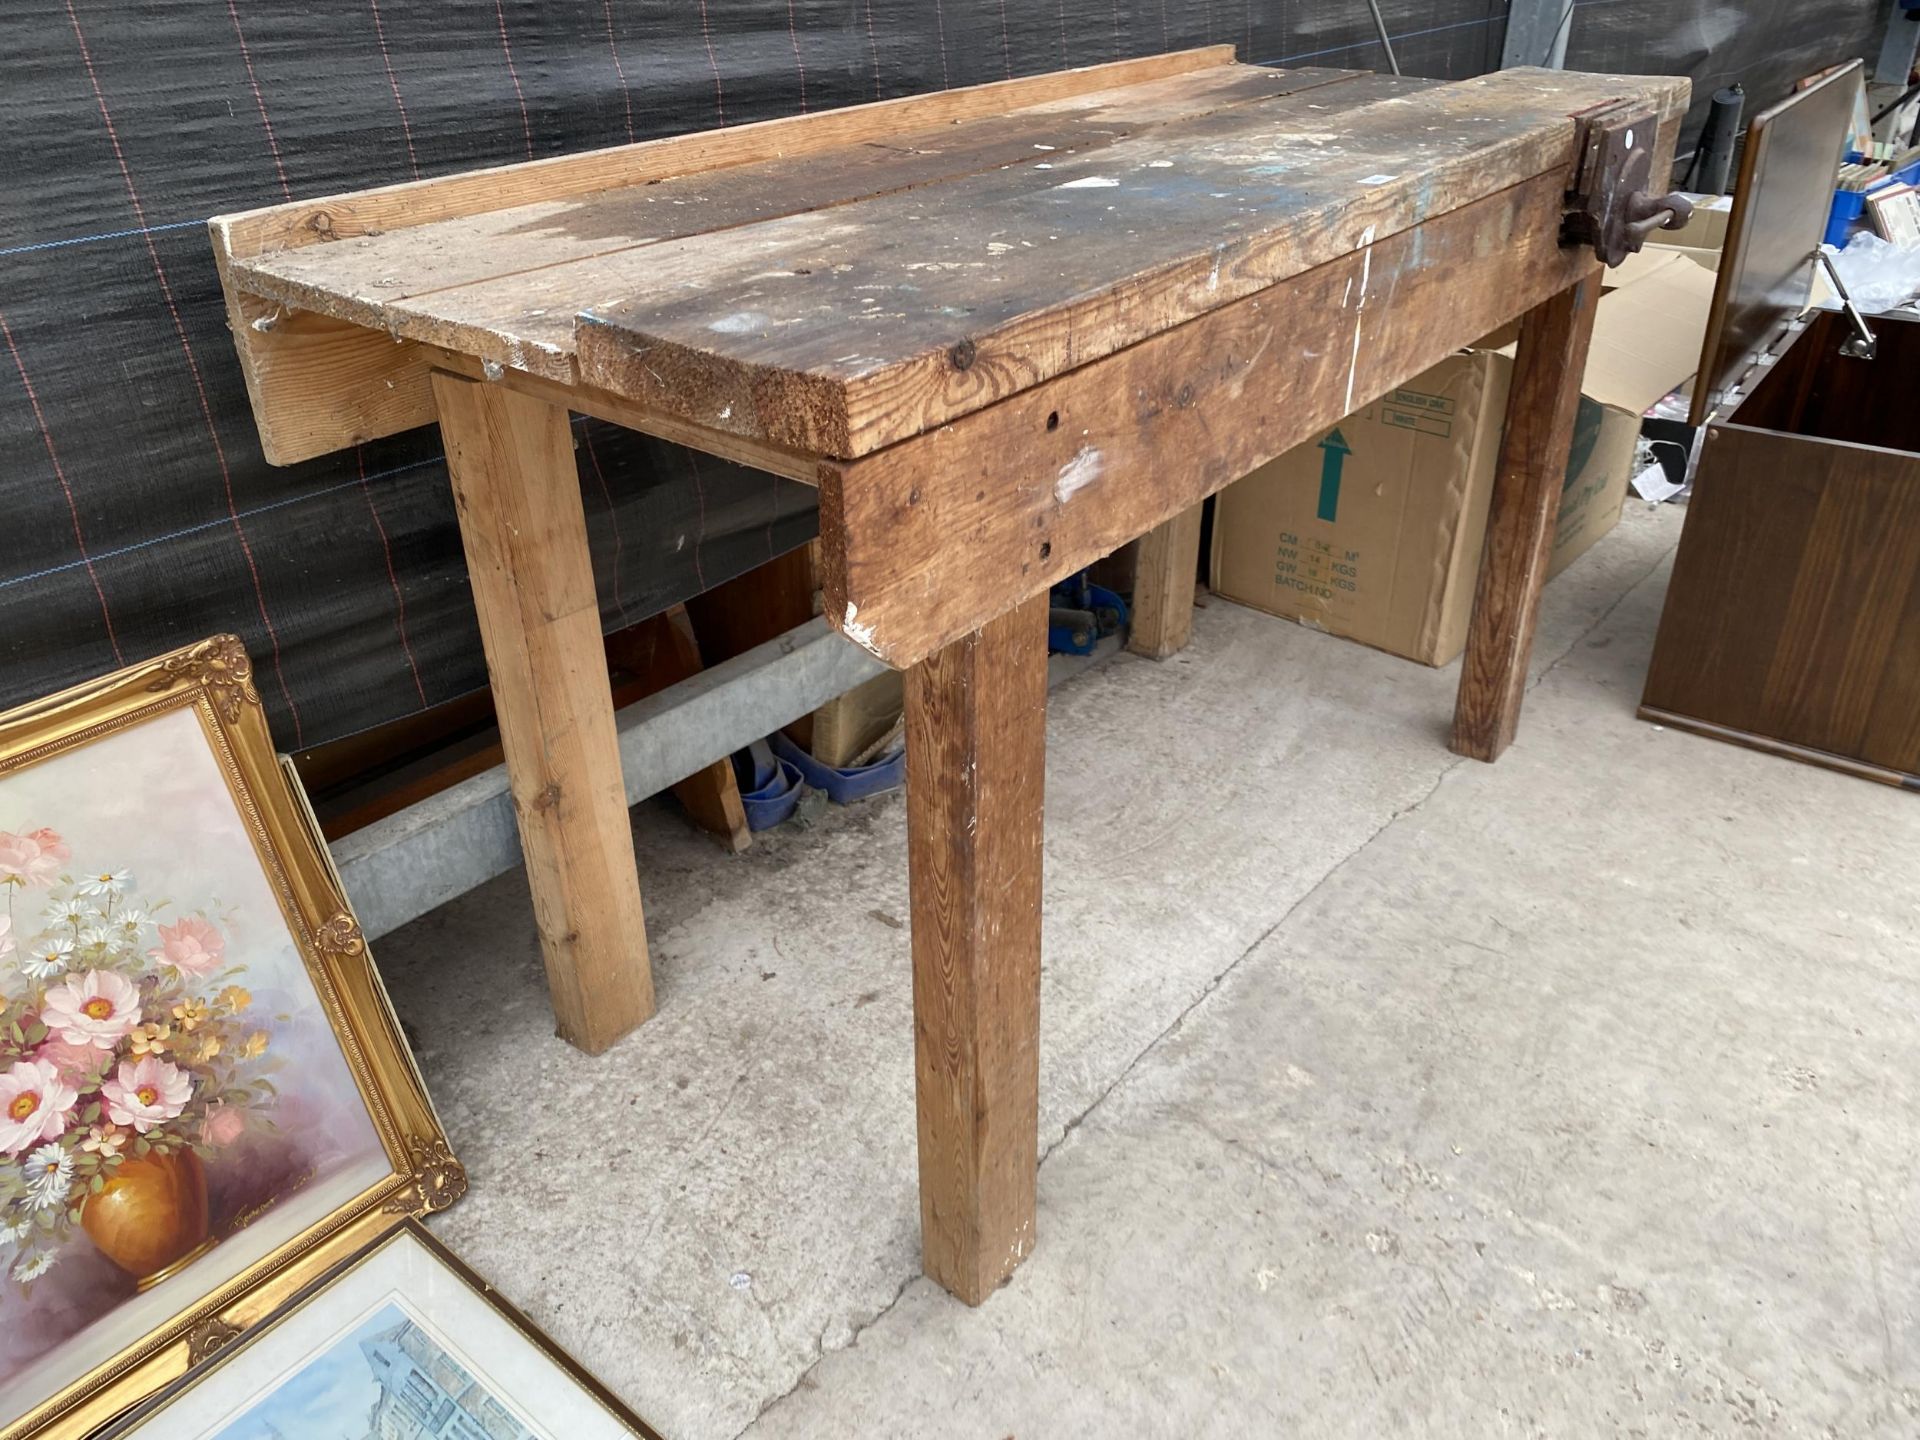 A LARGE WOODEN WORK BENCH COMPLETE WITH A WOOD VICE (L:160CM) - Image 2 of 3